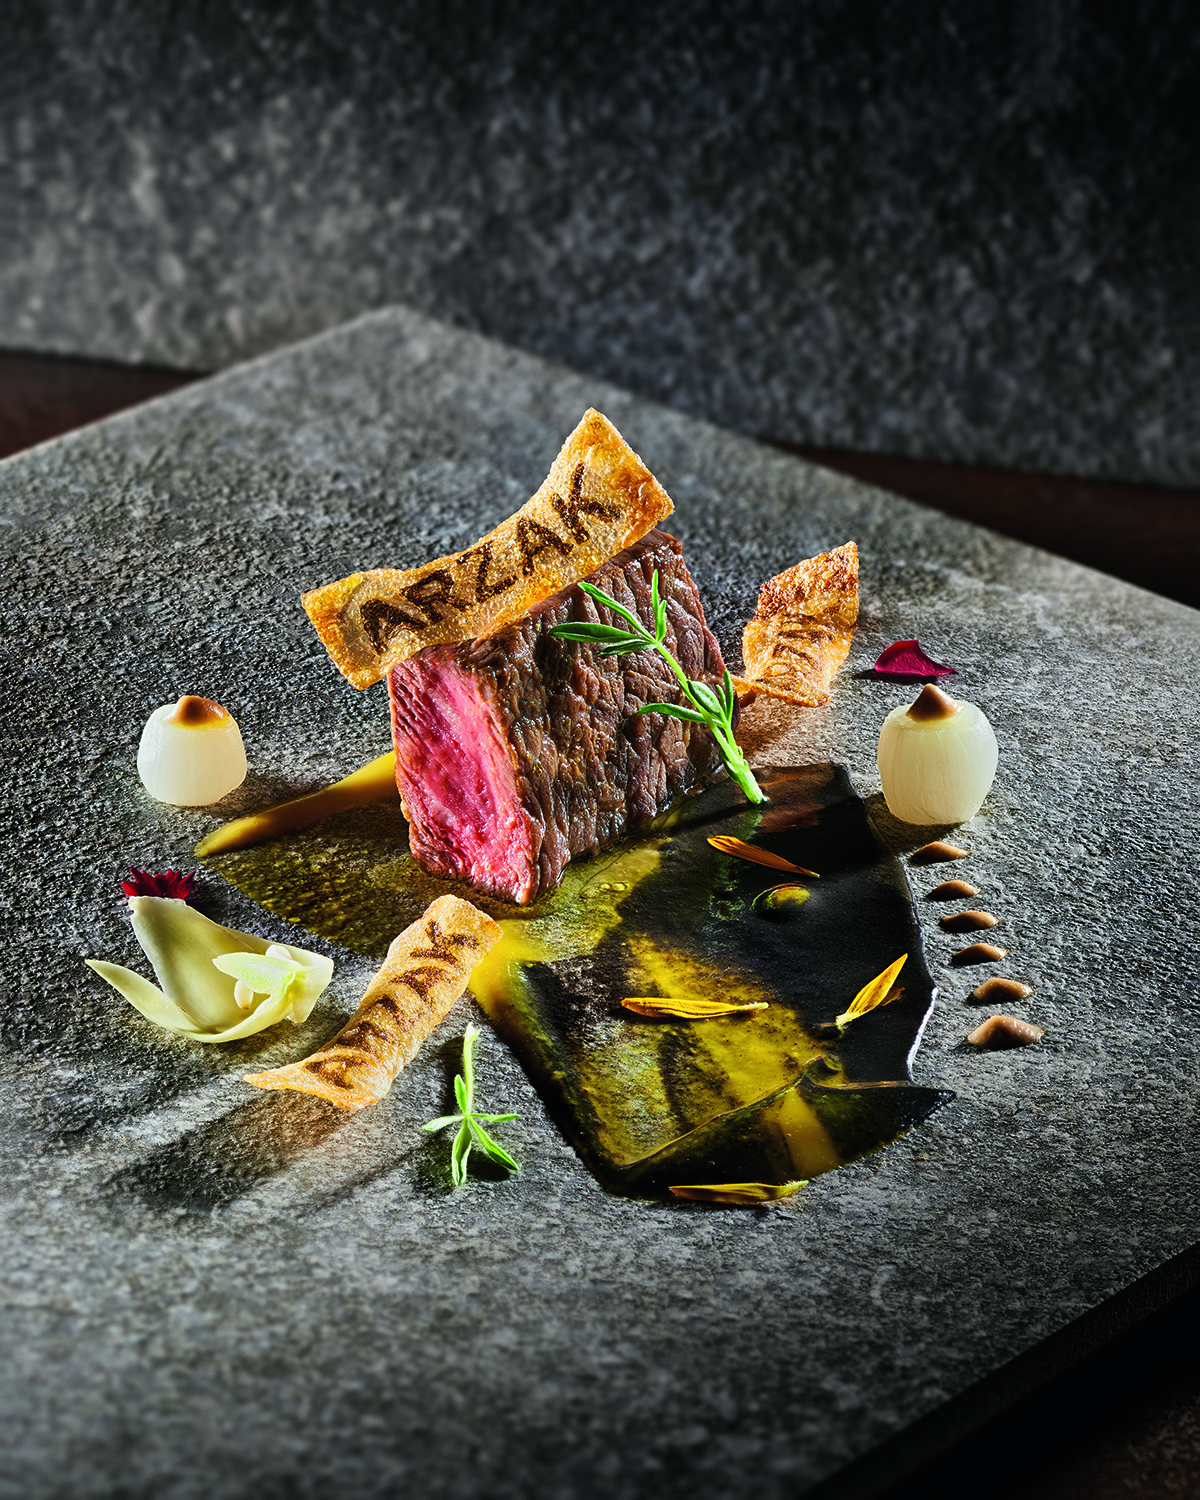 A steak on a plate with a cracker that has the words ARZAK burnt into it